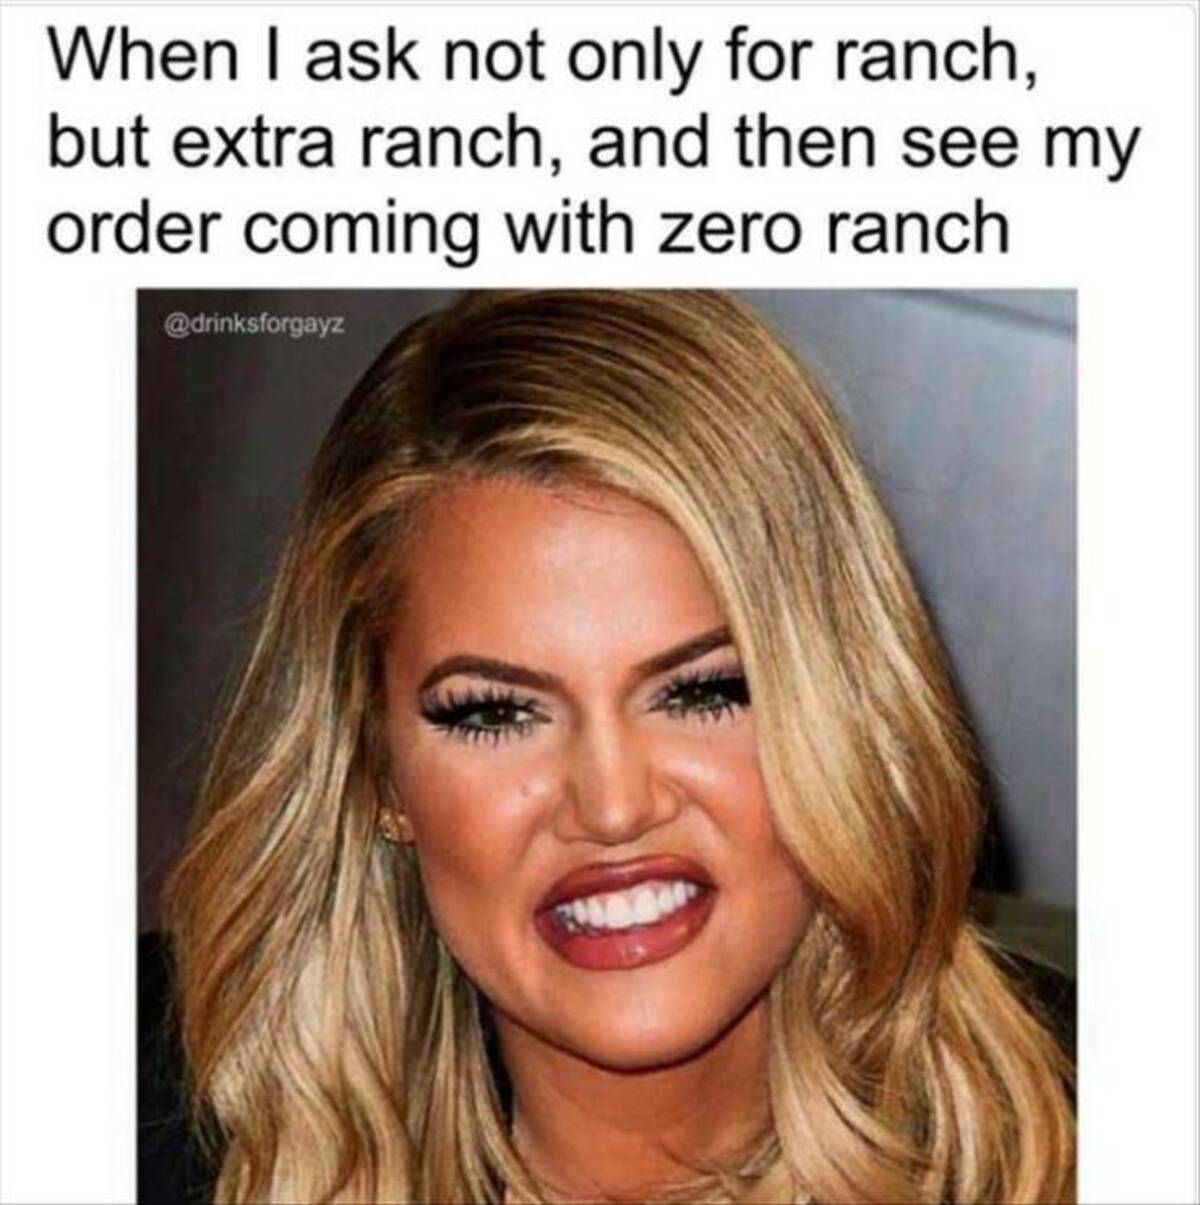 khloe kardashian wrinkles - When I ask not only for ranch, but extra ranch, and then see my order coming with zero ranch 788800